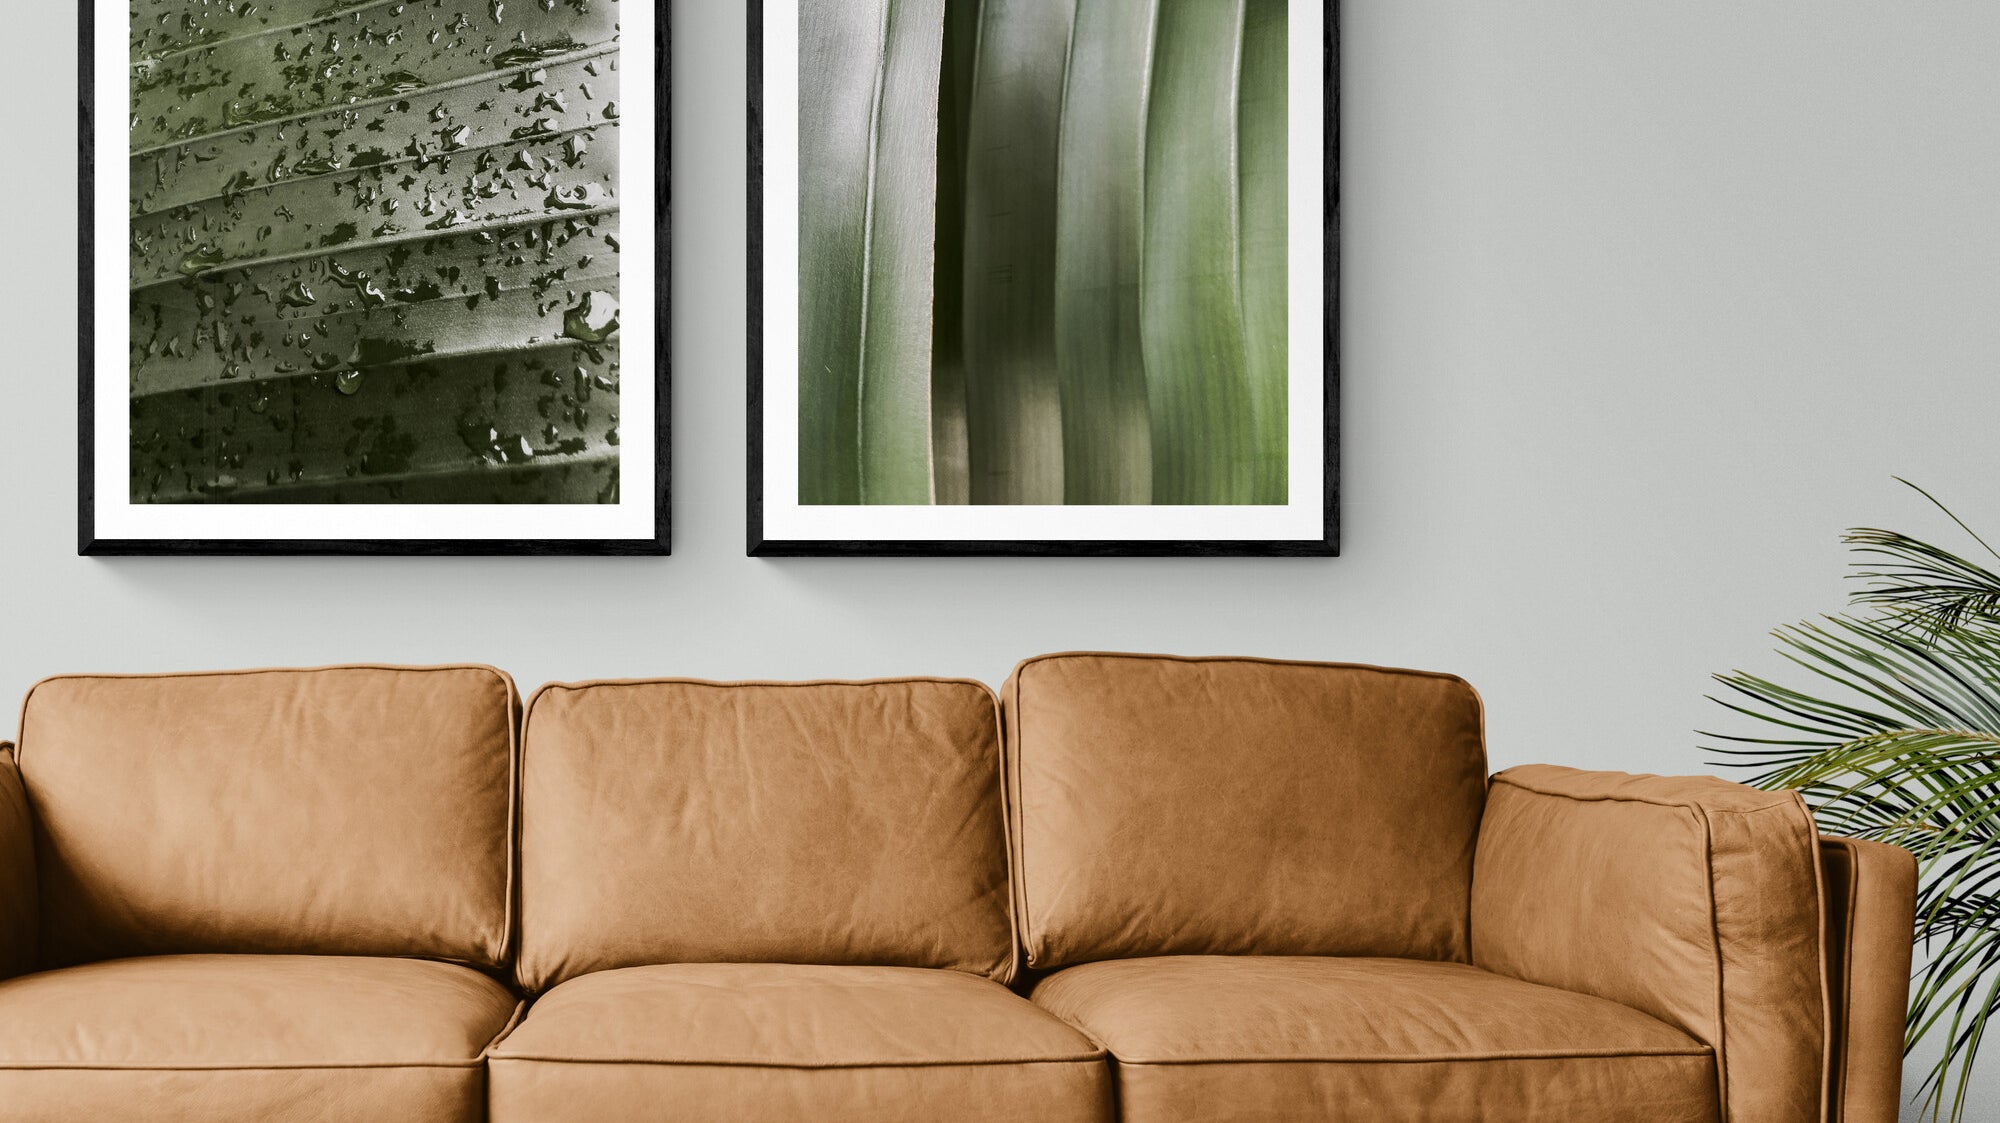 Botanical Framed Photography For Your Home Decor